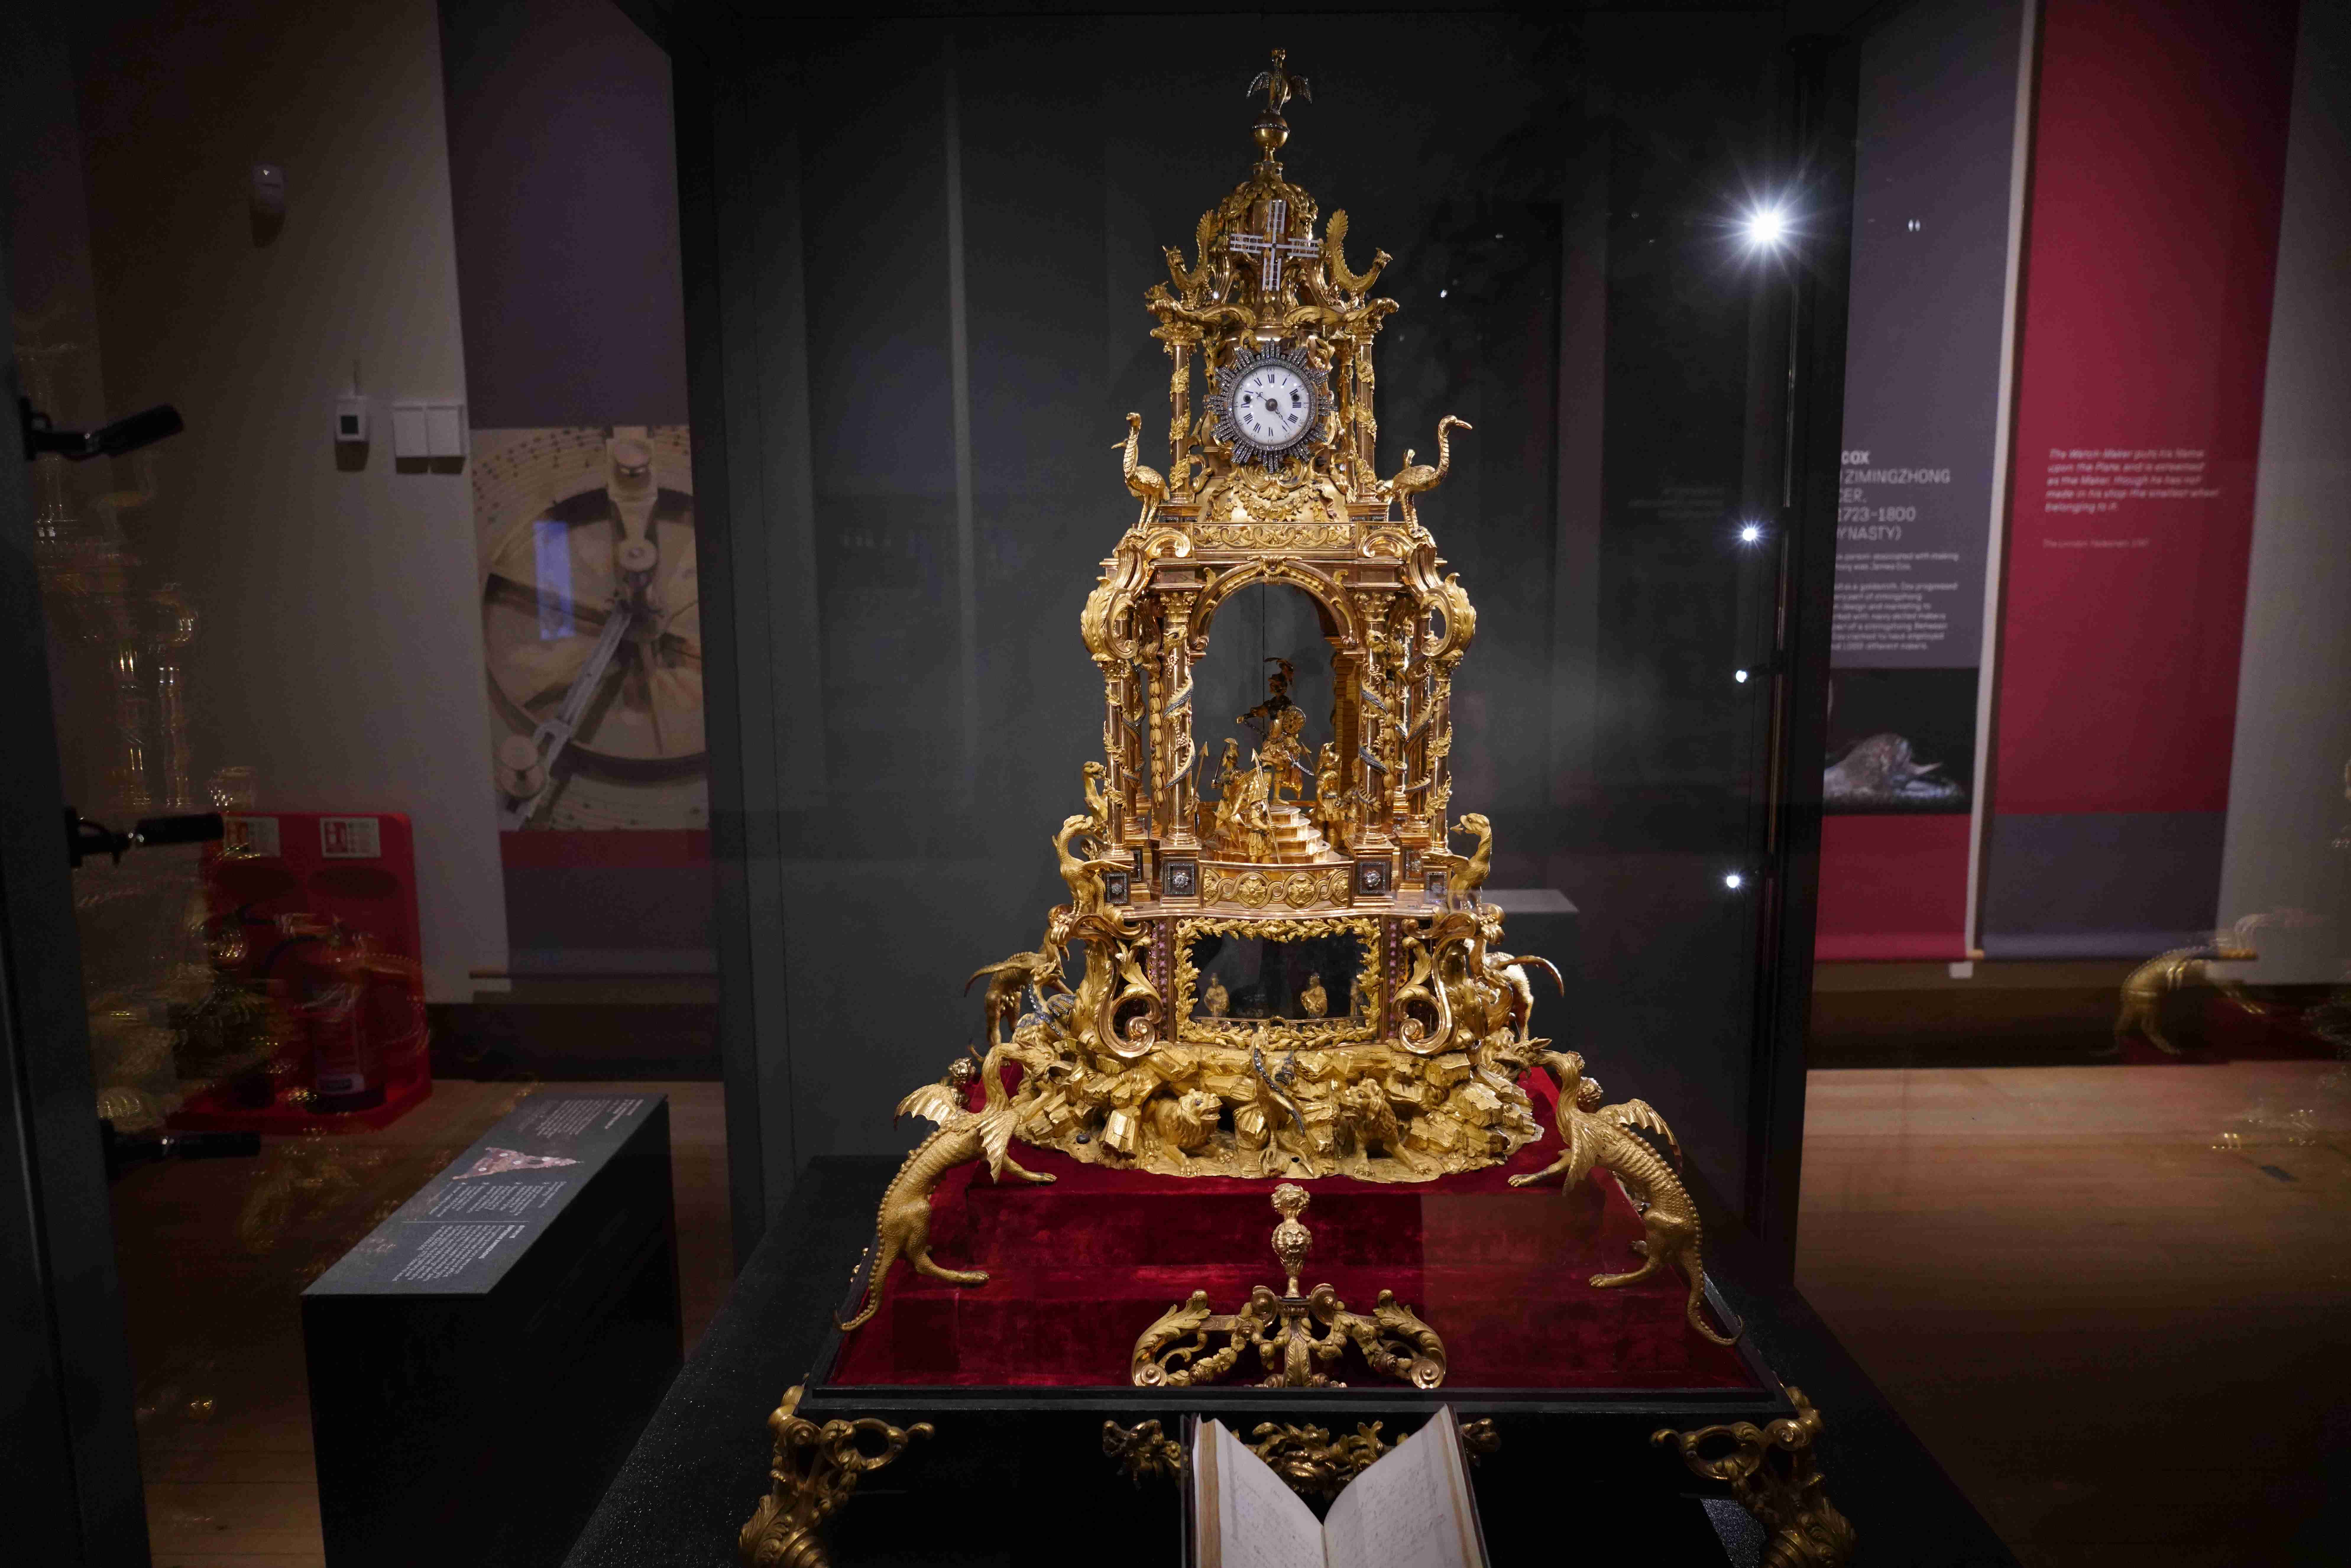 Temple Zimingzhong made by James Upjohn, in the collection of the Palace Museum. /CGTN Europe